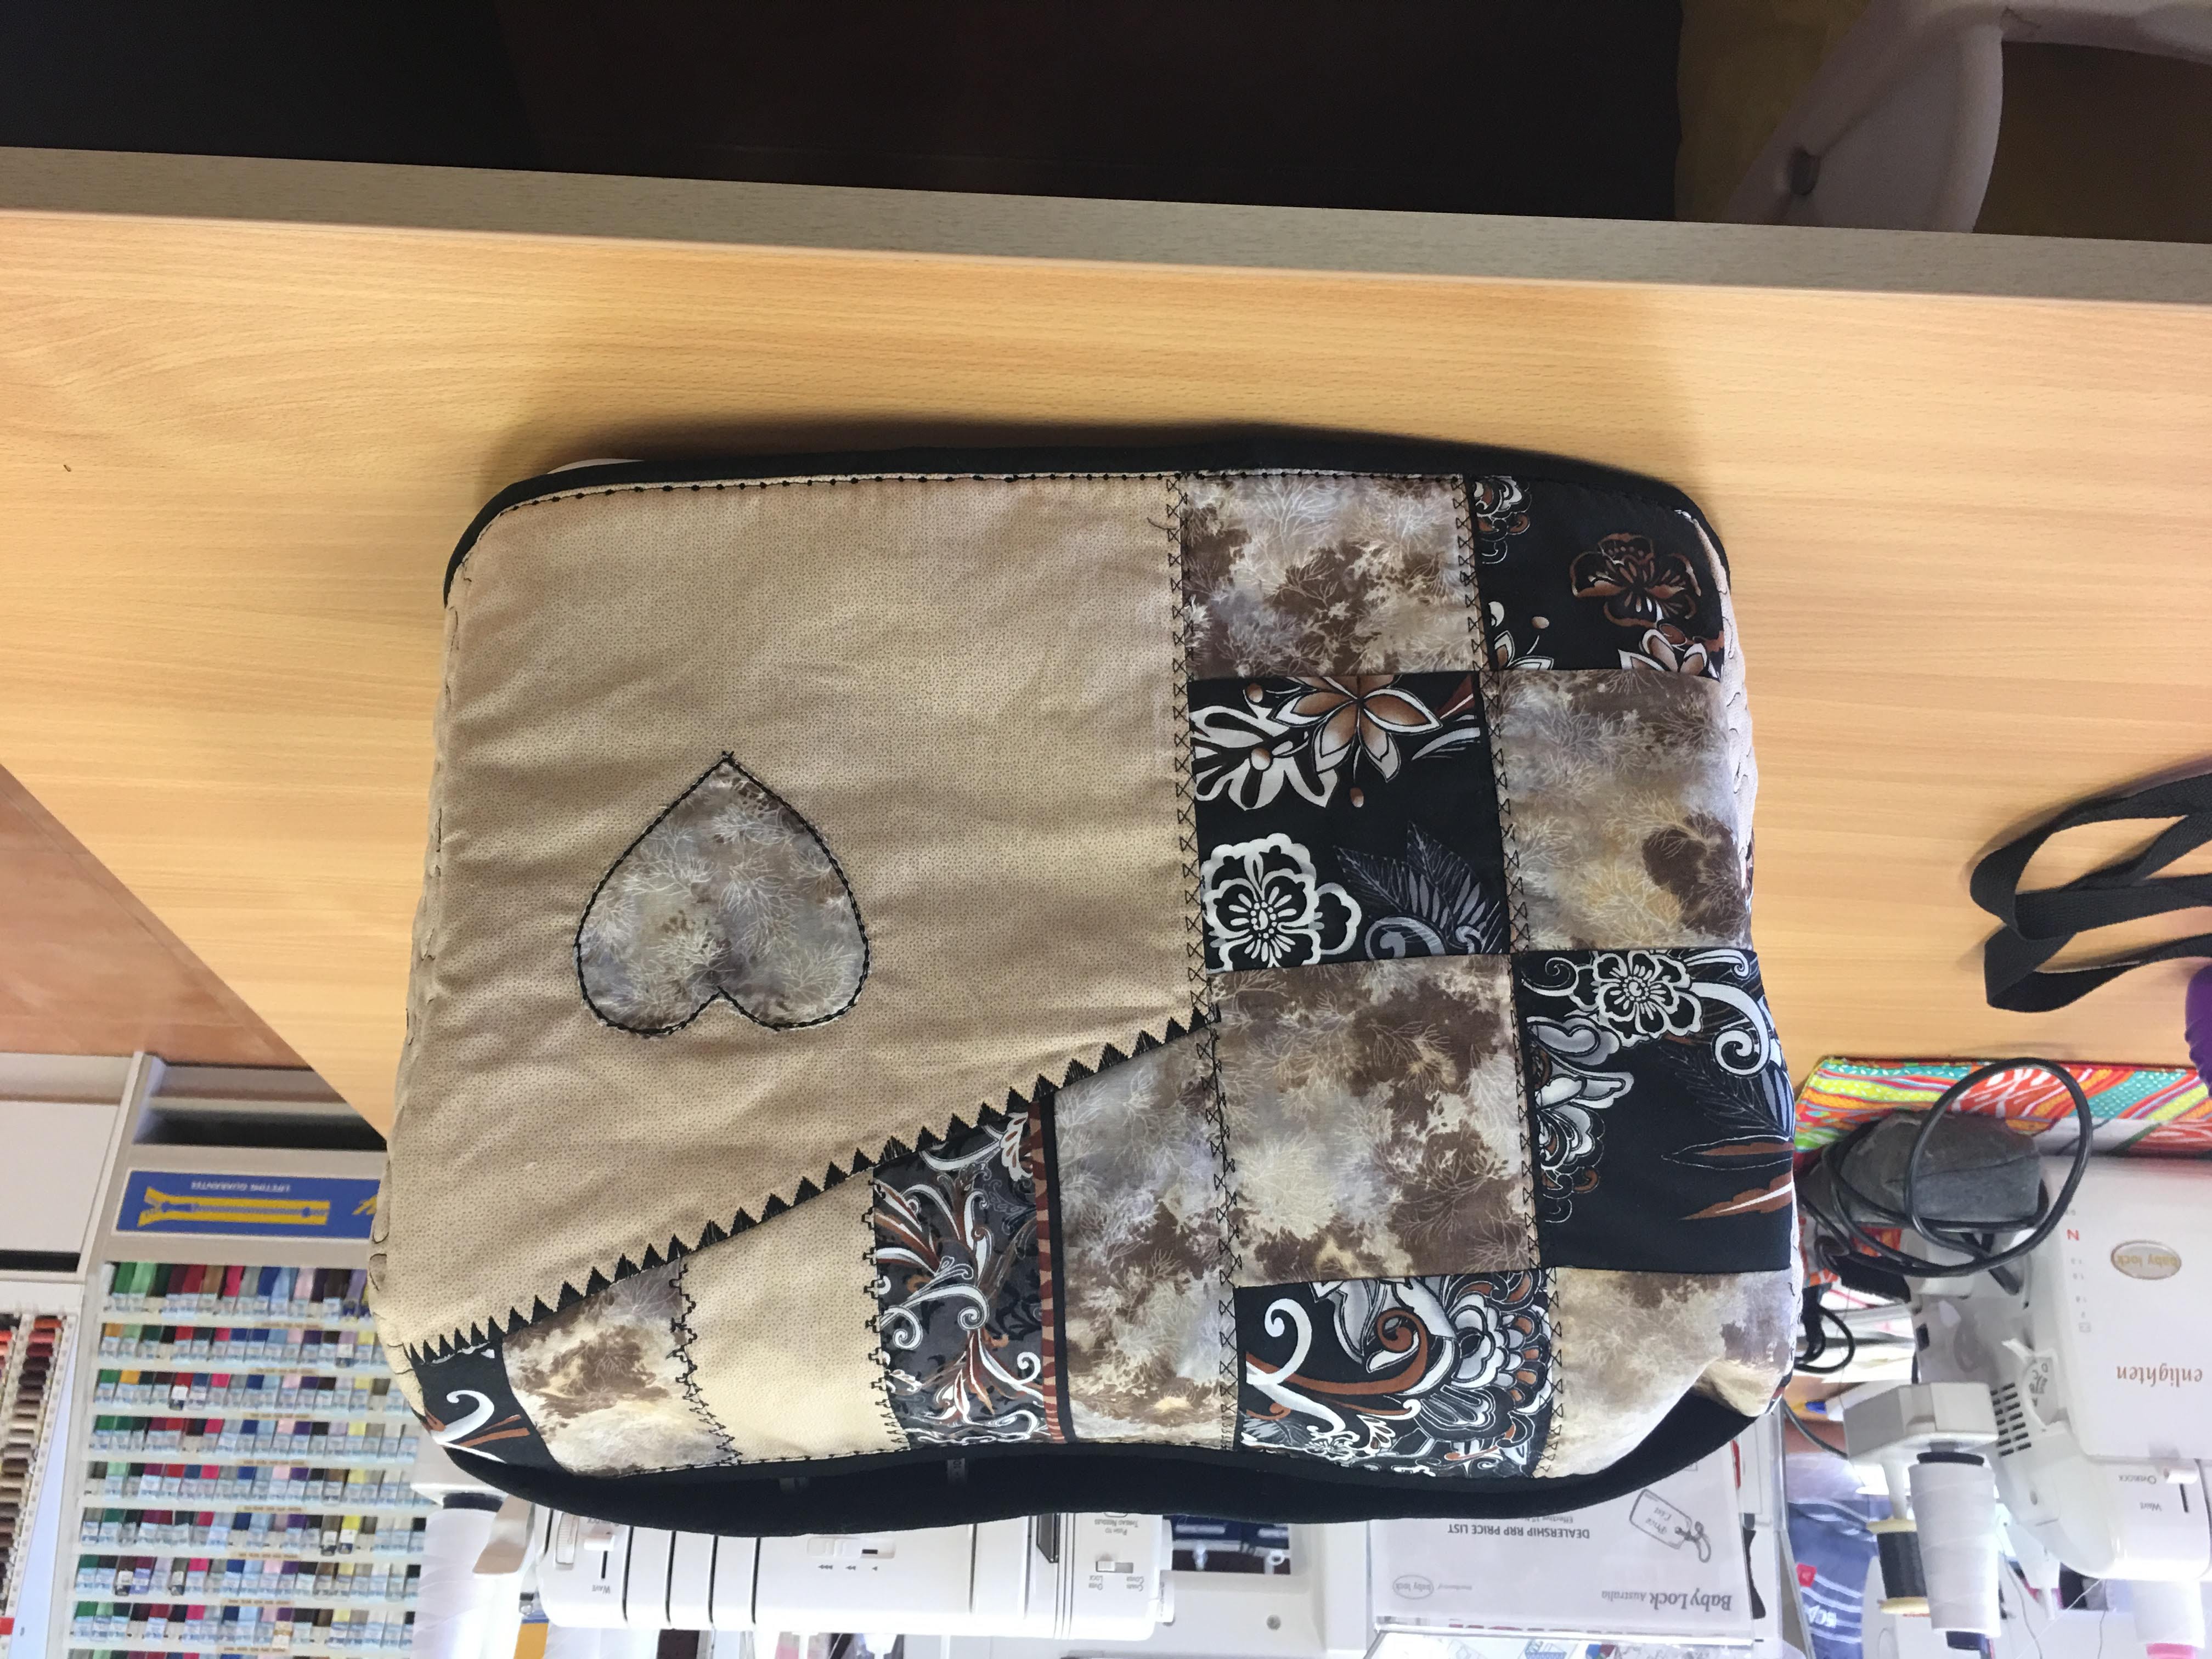 A stunning sewing machine cover made for Vickis Janome. Loads of great built in stitches were showcased in this (and what a great way to get to know your new machine)